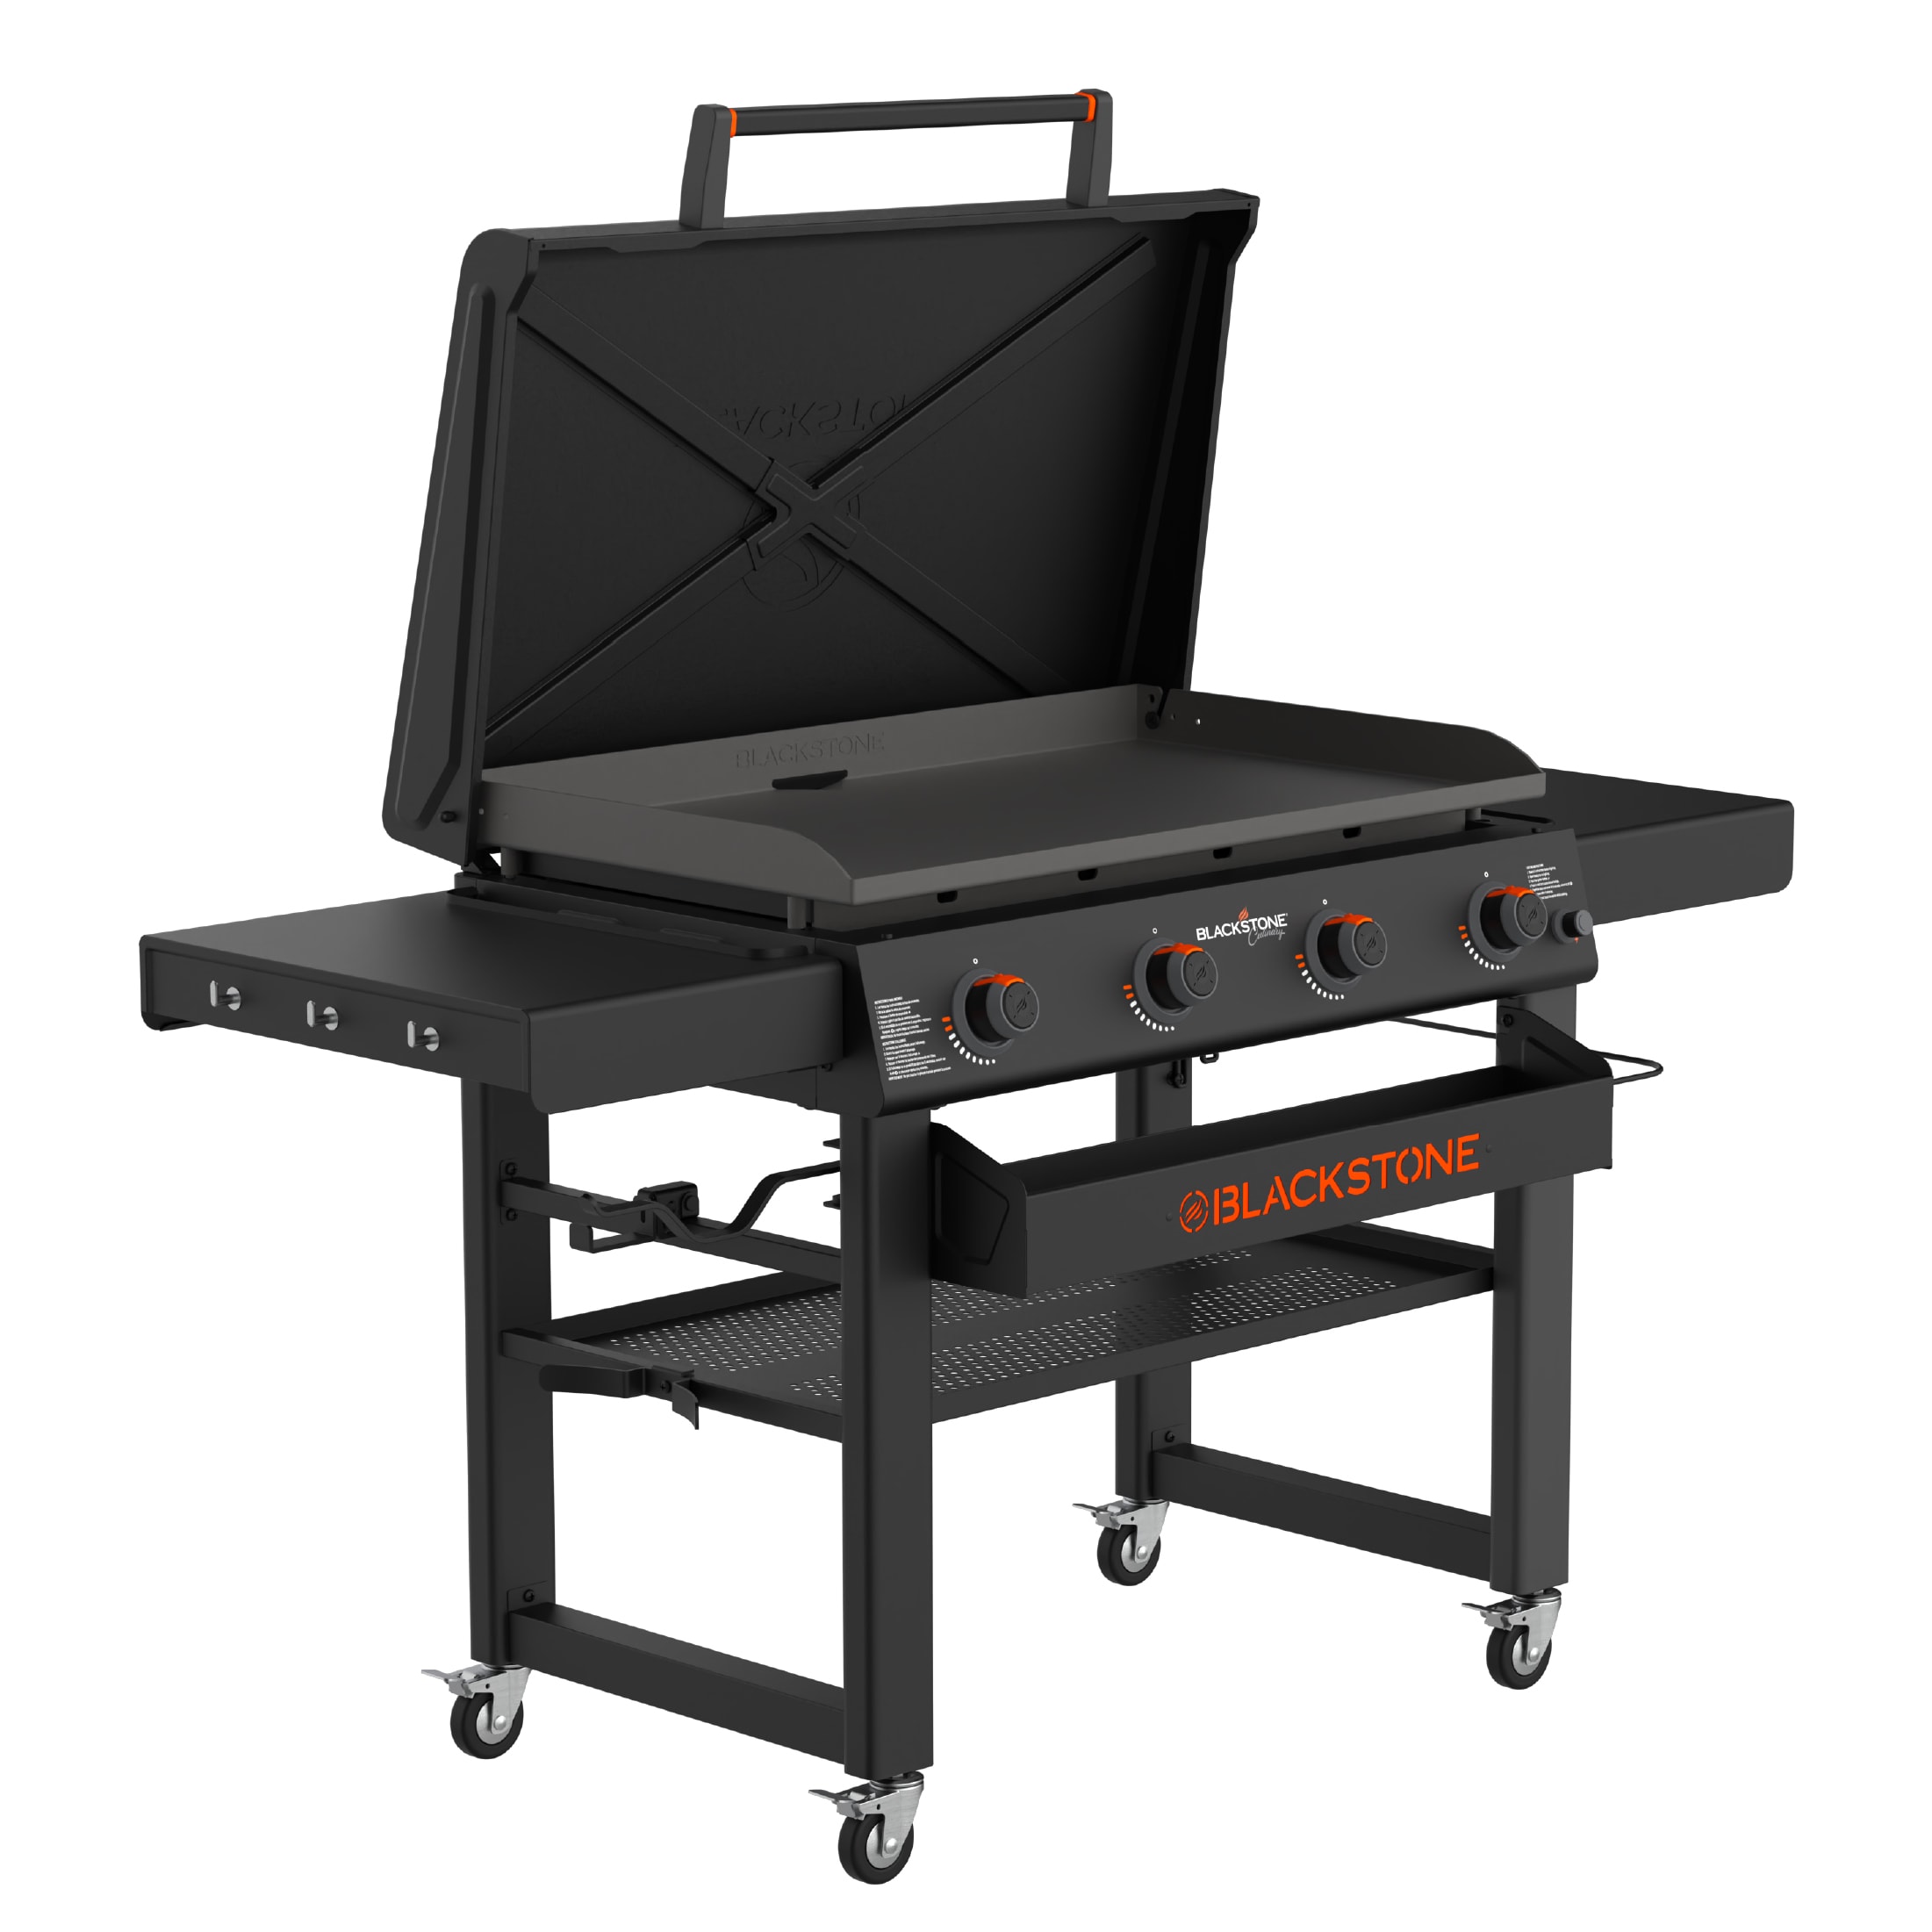 Mr. Outdoors Cookout 18 in. Aluminum Non-Stick Griddle at Tractor Supply Co.